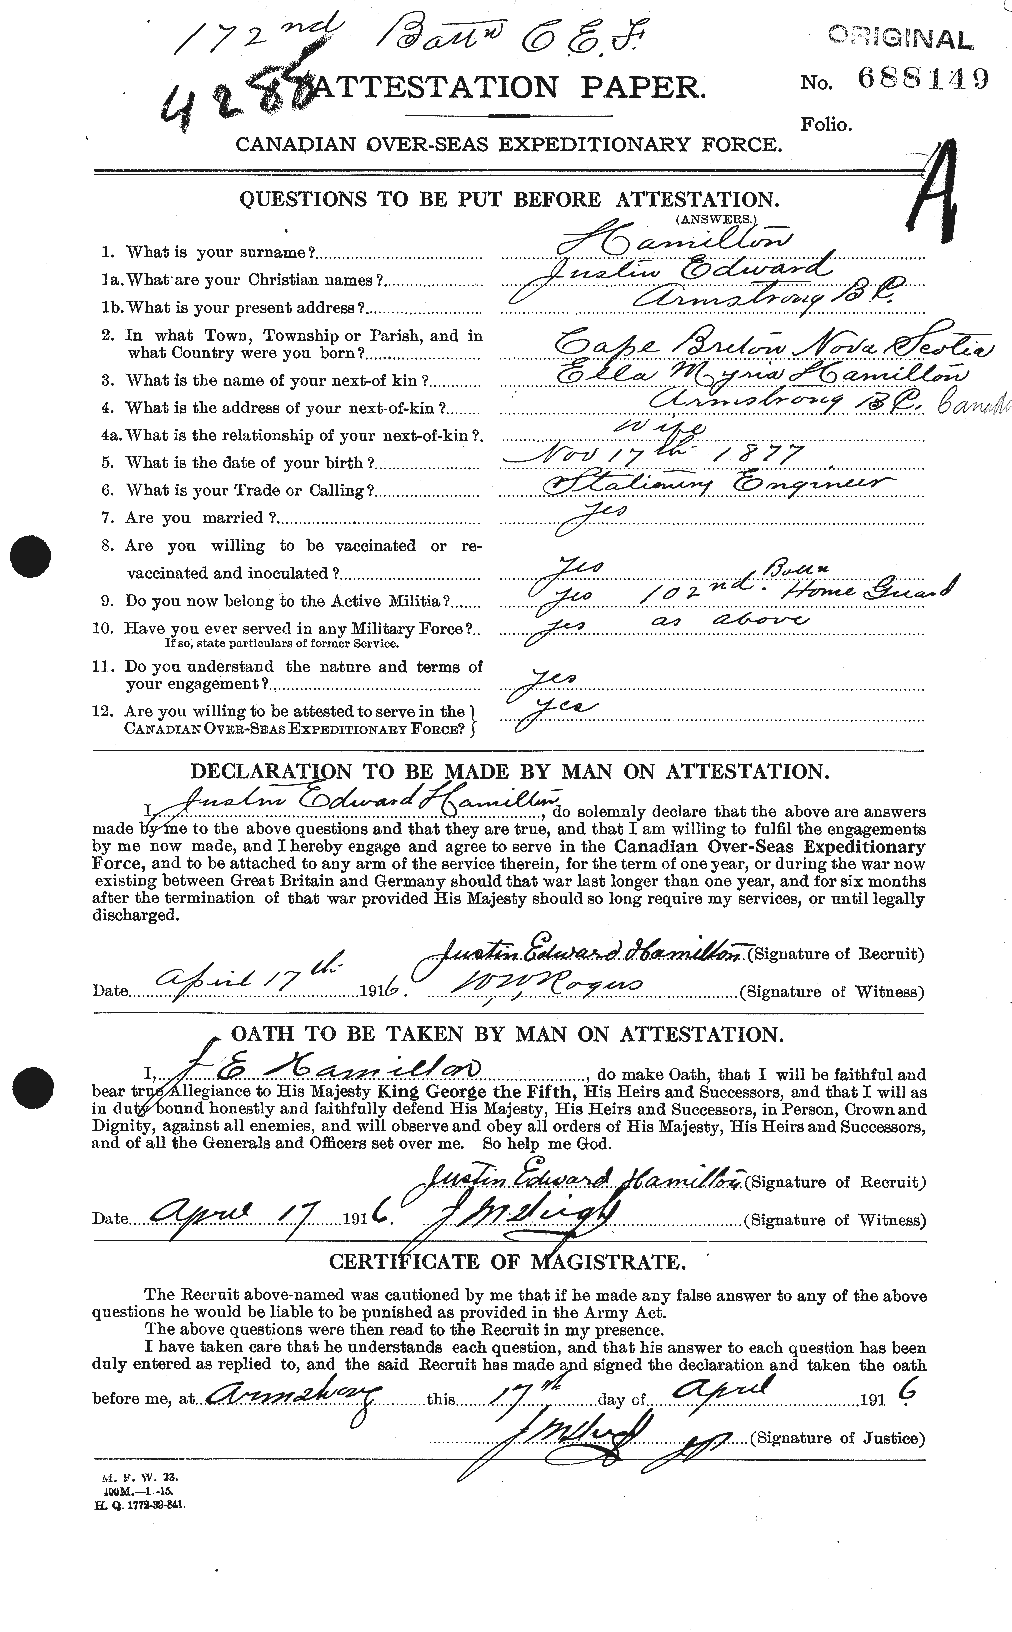 Personnel Records of the First World War - CEF 373149a